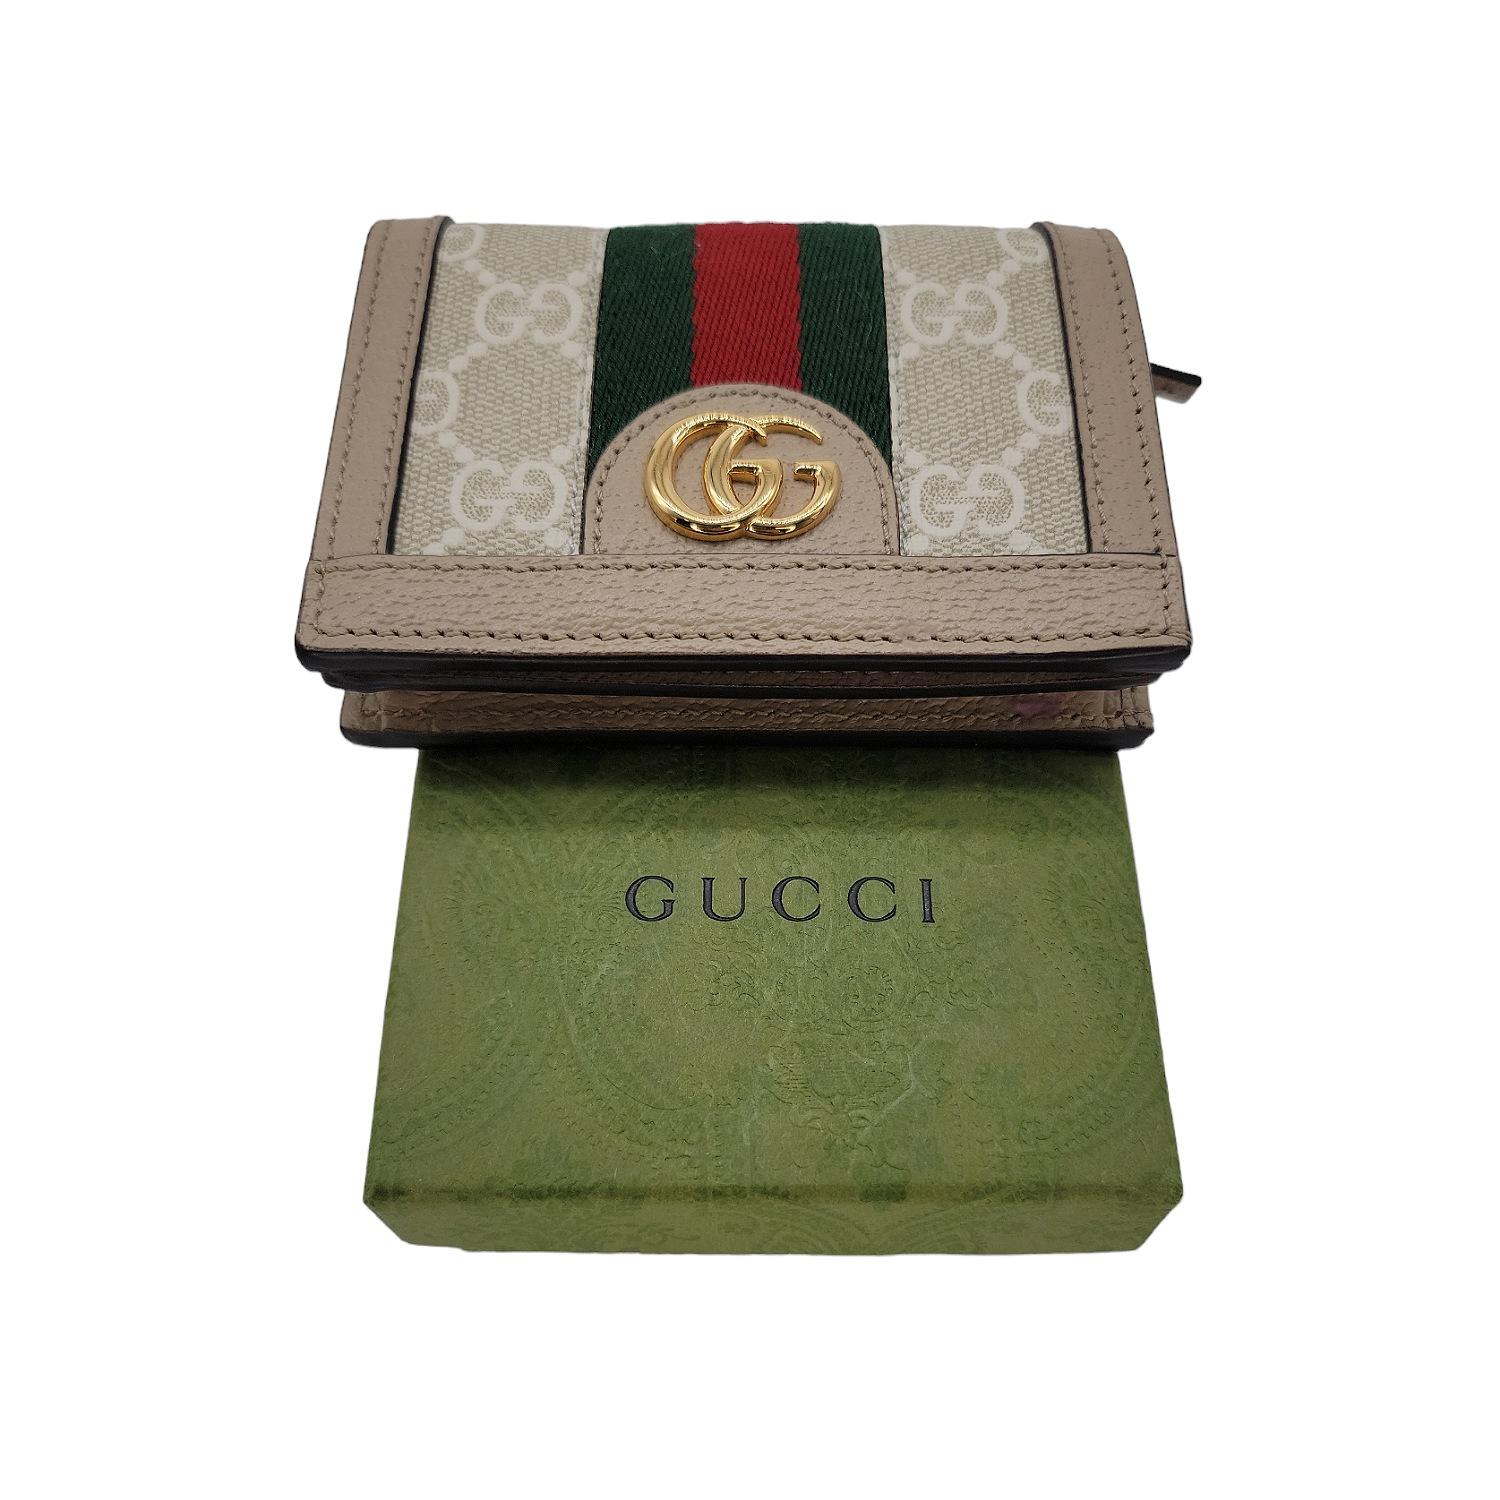 Gucci Ophidia GG Supreme Canvas Card Case Wallet In Excellent Condition For Sale In Scottsdale, AZ